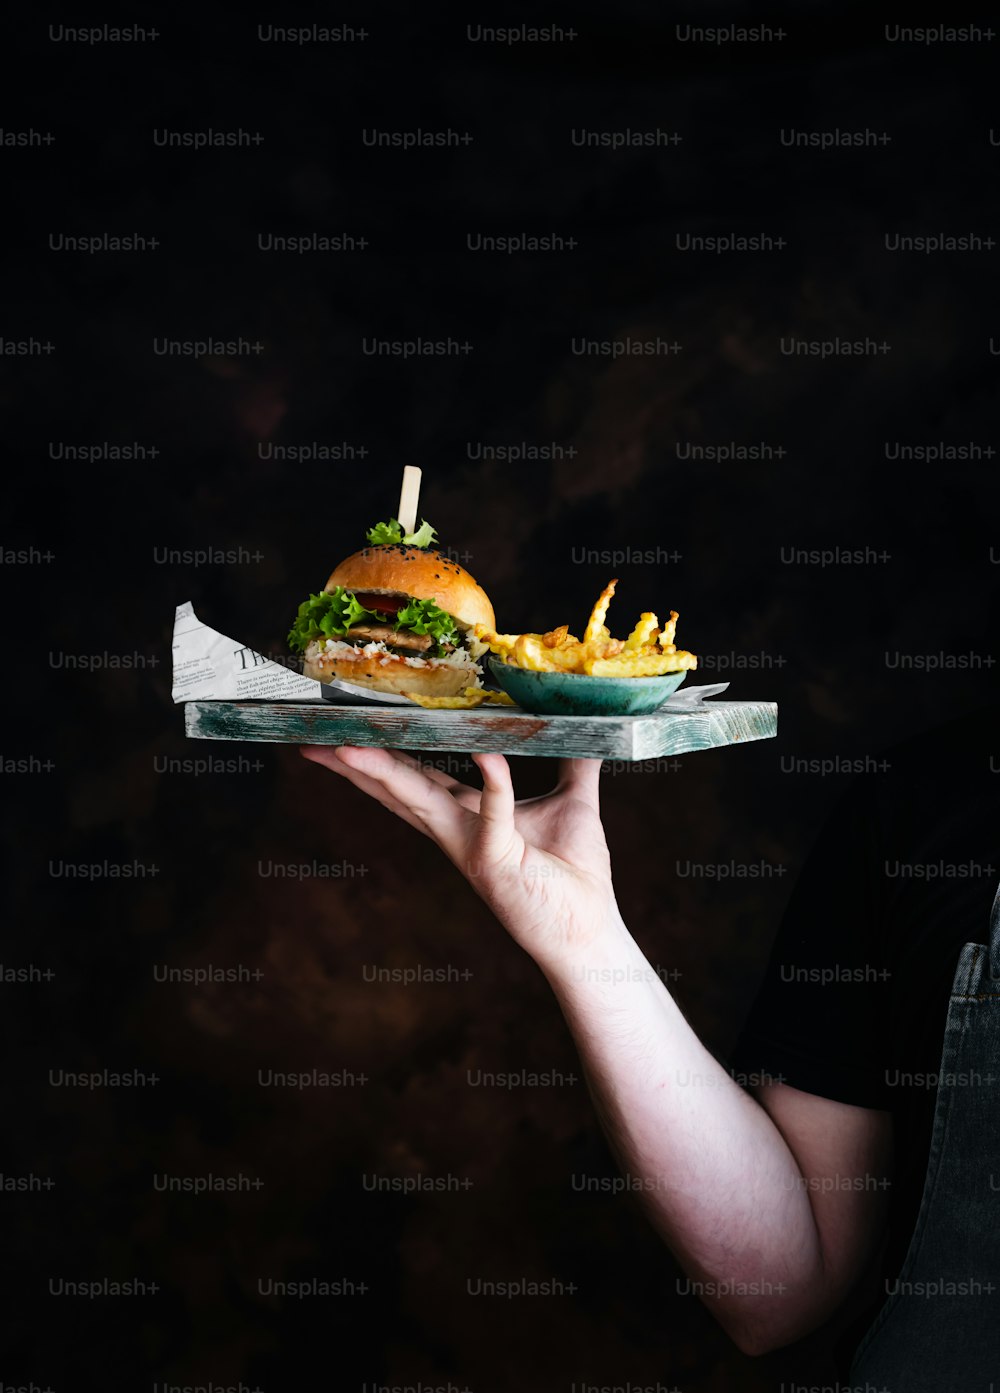 a person holding a tray with a sandwich and fries on it